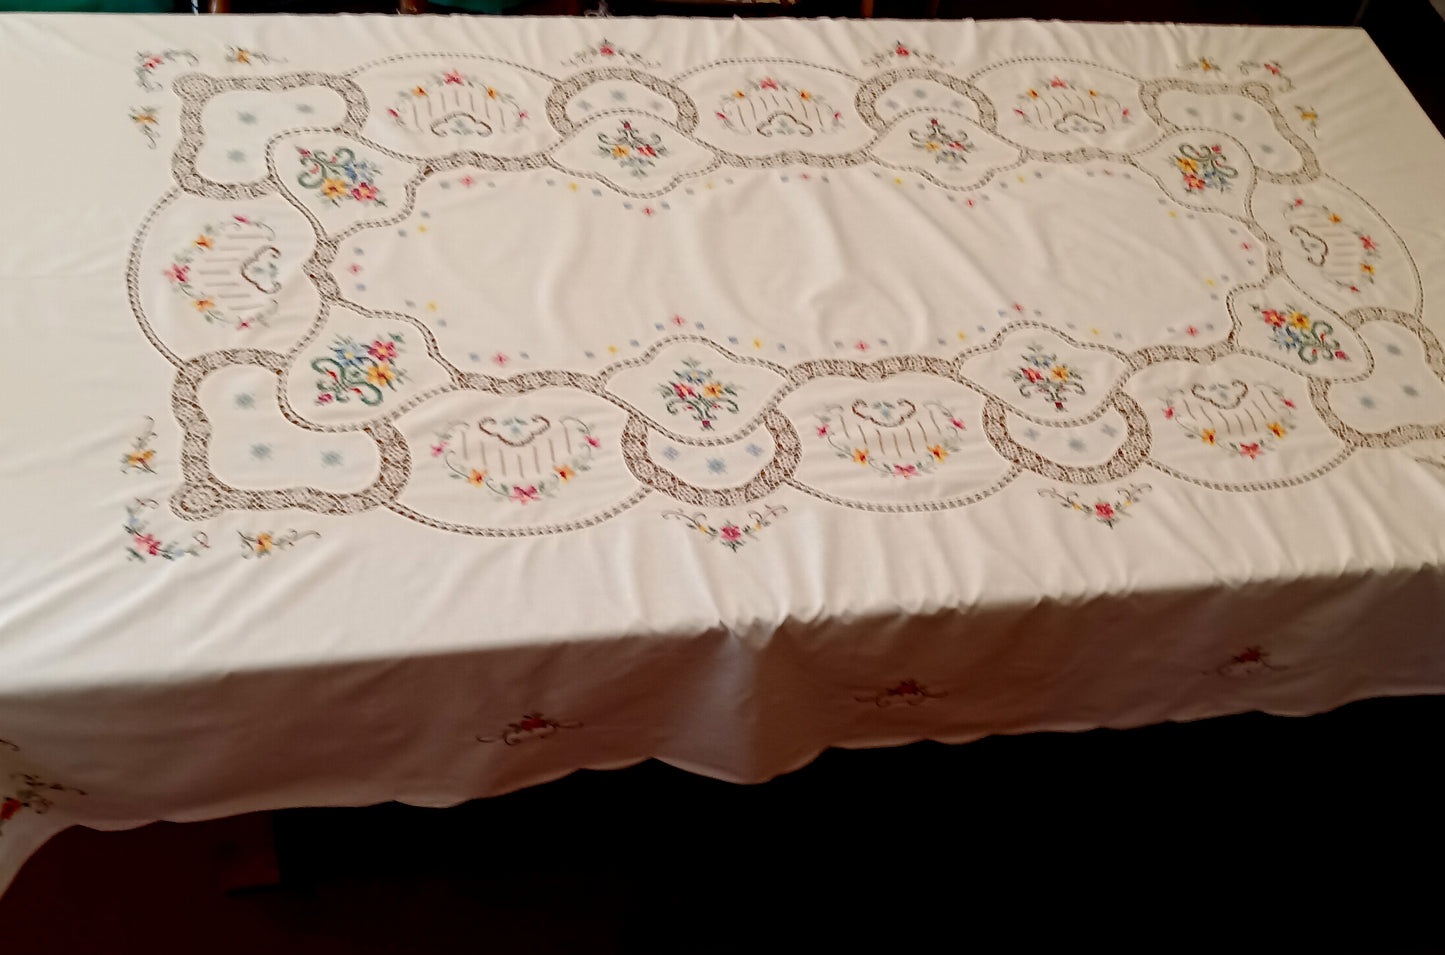 Vintage Handmade Crochet Lace Embroidered Cross Stitch Floral Beige Linen Medallion Rectangle Tablecloth Dining Table Cover 64” W x 94“ L